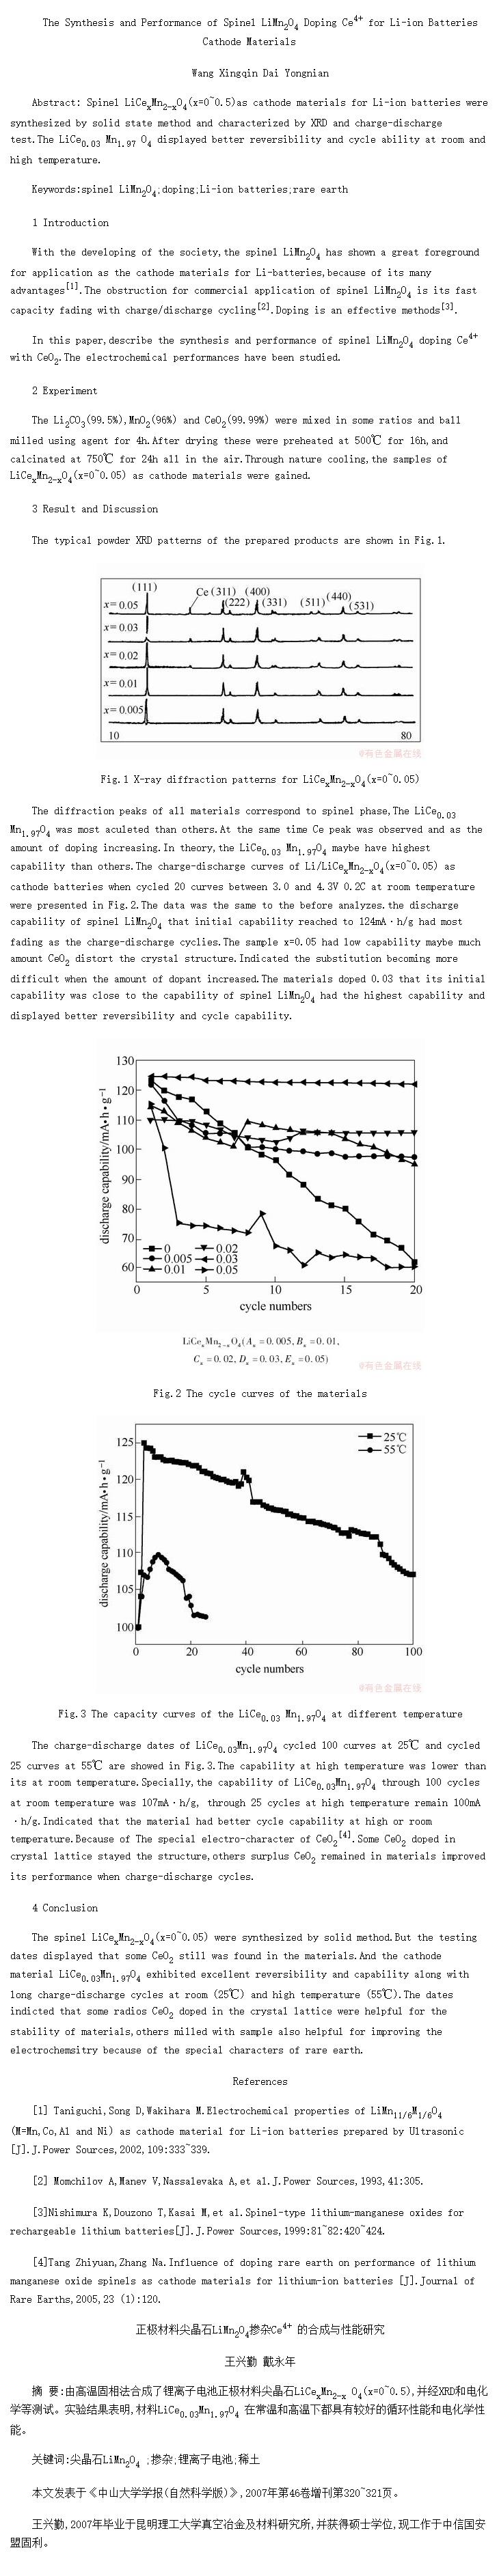 The Synthesis and Performance of Spinel LiMn<SUB>2</SUB>O<SUB>4</SUB> Doping Ce<SUP>4+</SUP> for Li-ion Batteries Cathode Materials